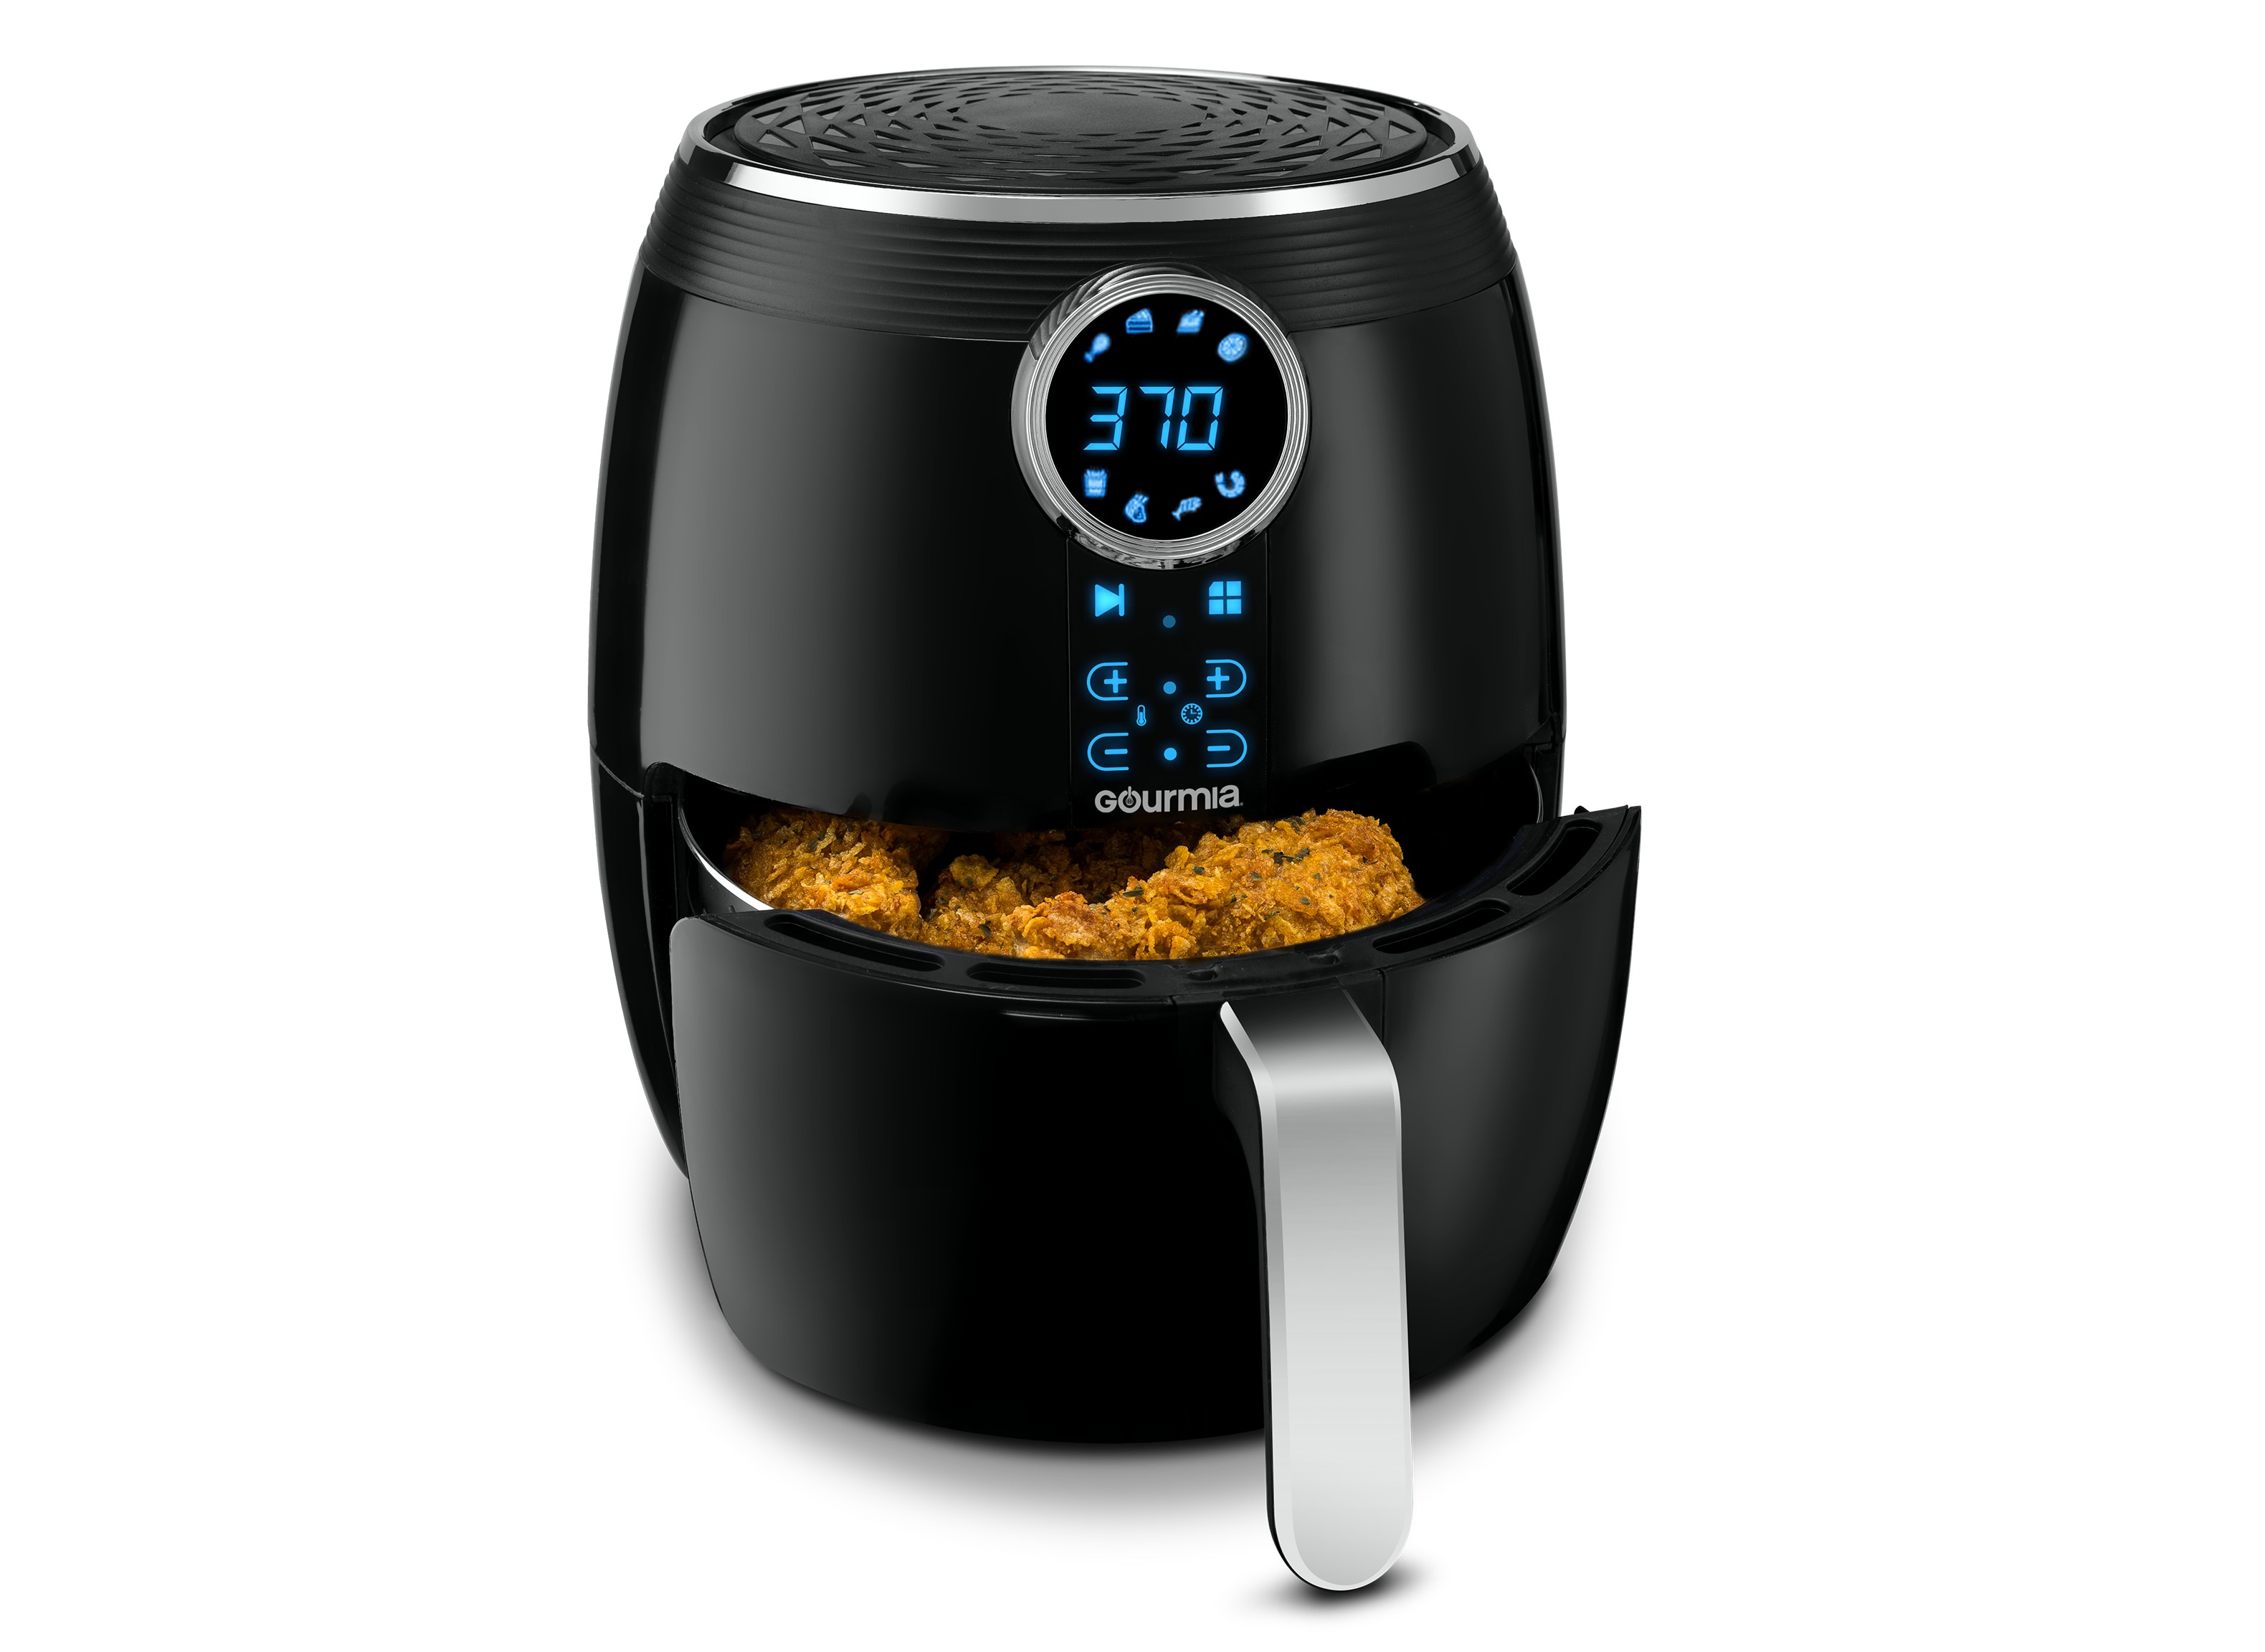 https://crdms.images.consumerreports.org/prod/products/cr/models/396484-air-fryers-gourmia-digital-air-gaf575-10000130.png